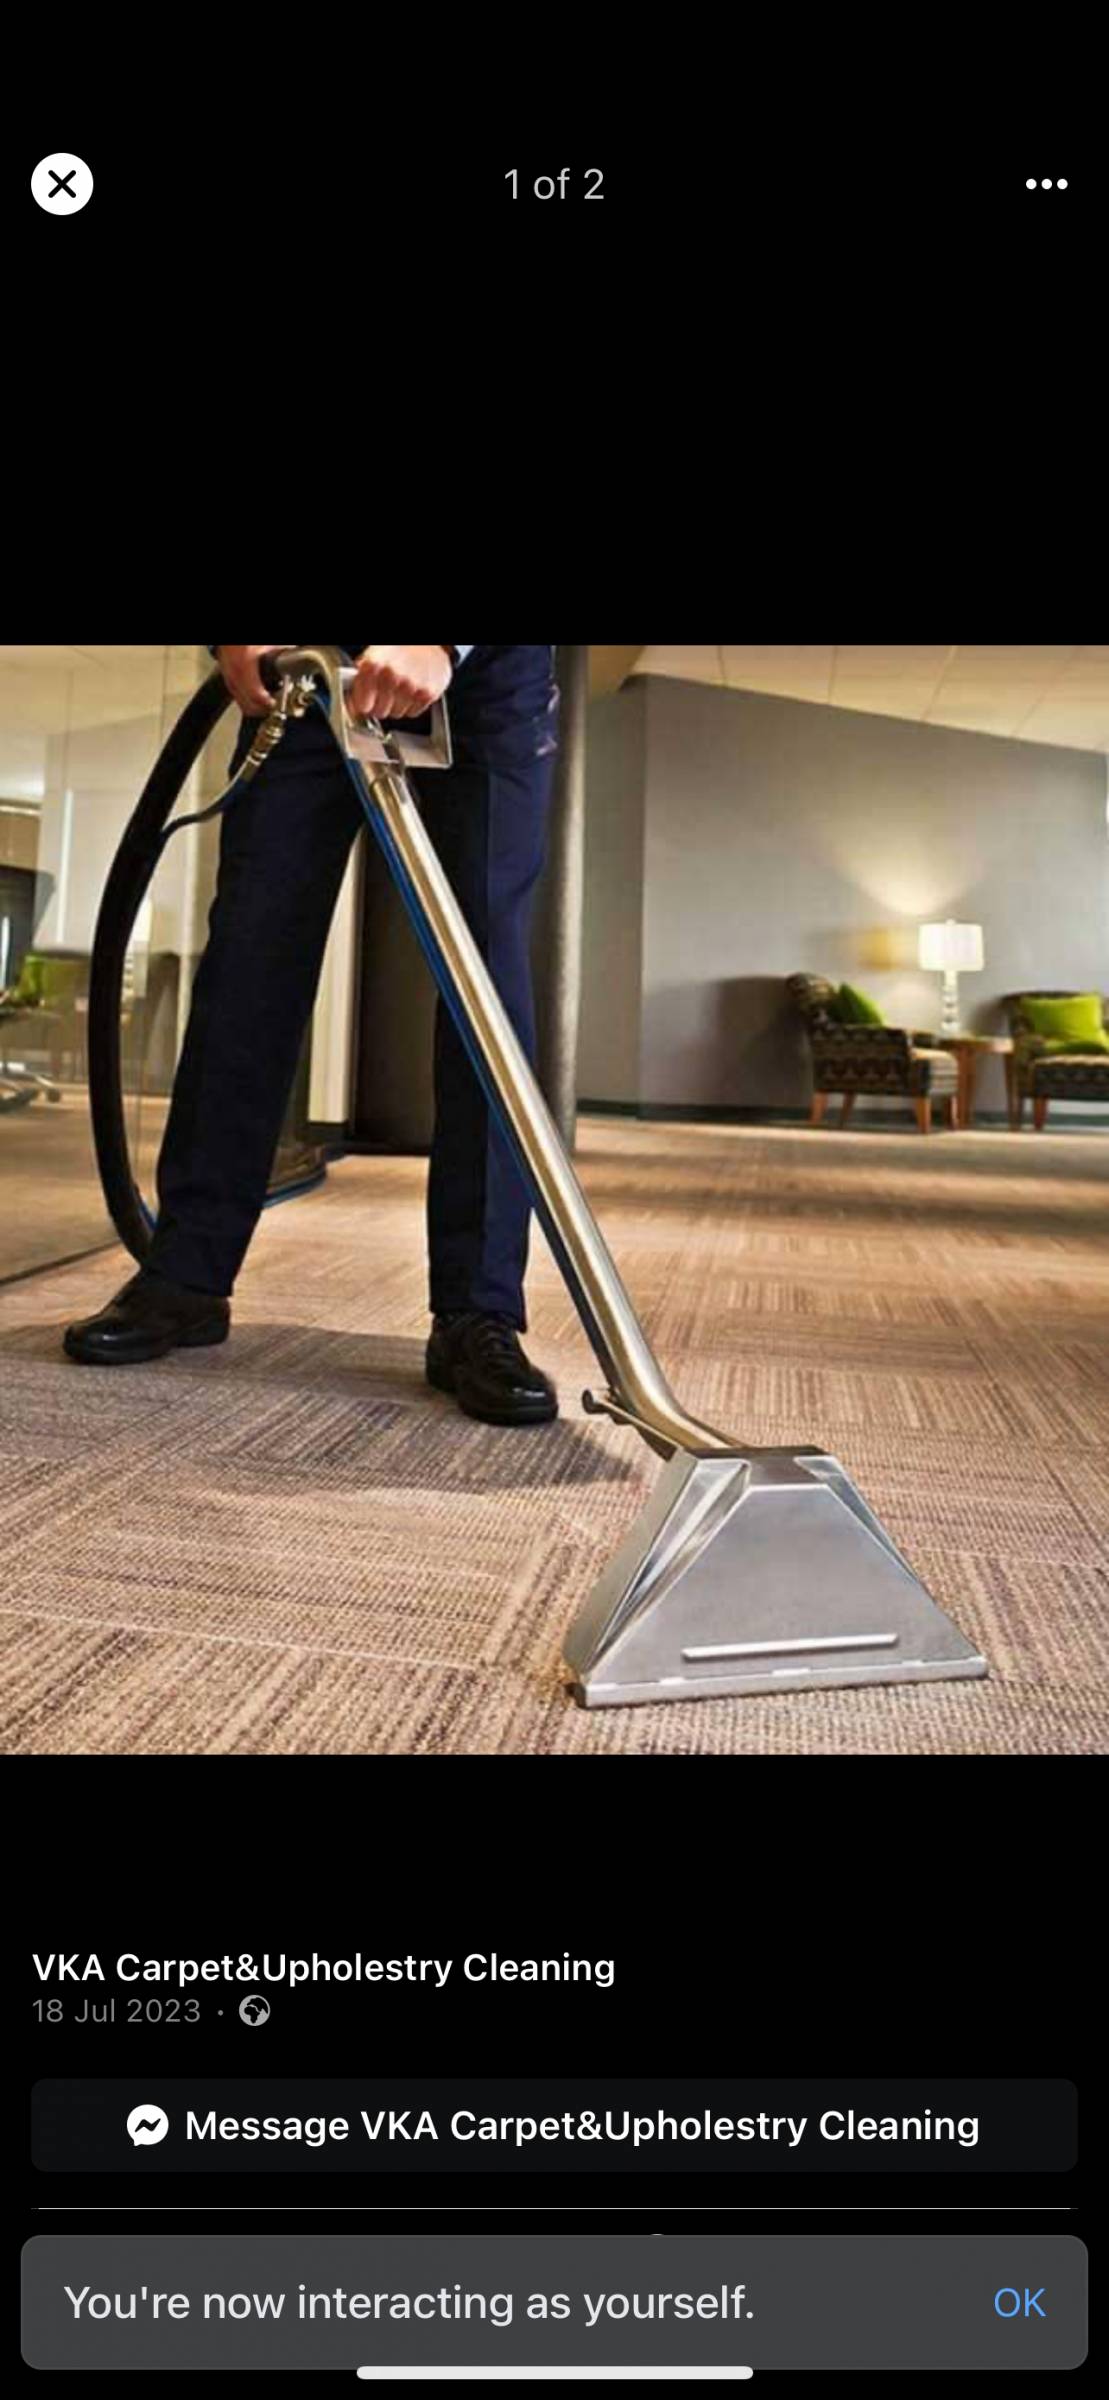 VKA Carpet&Upholstery cleaning - Wexford - Deep or Spring Cleaning